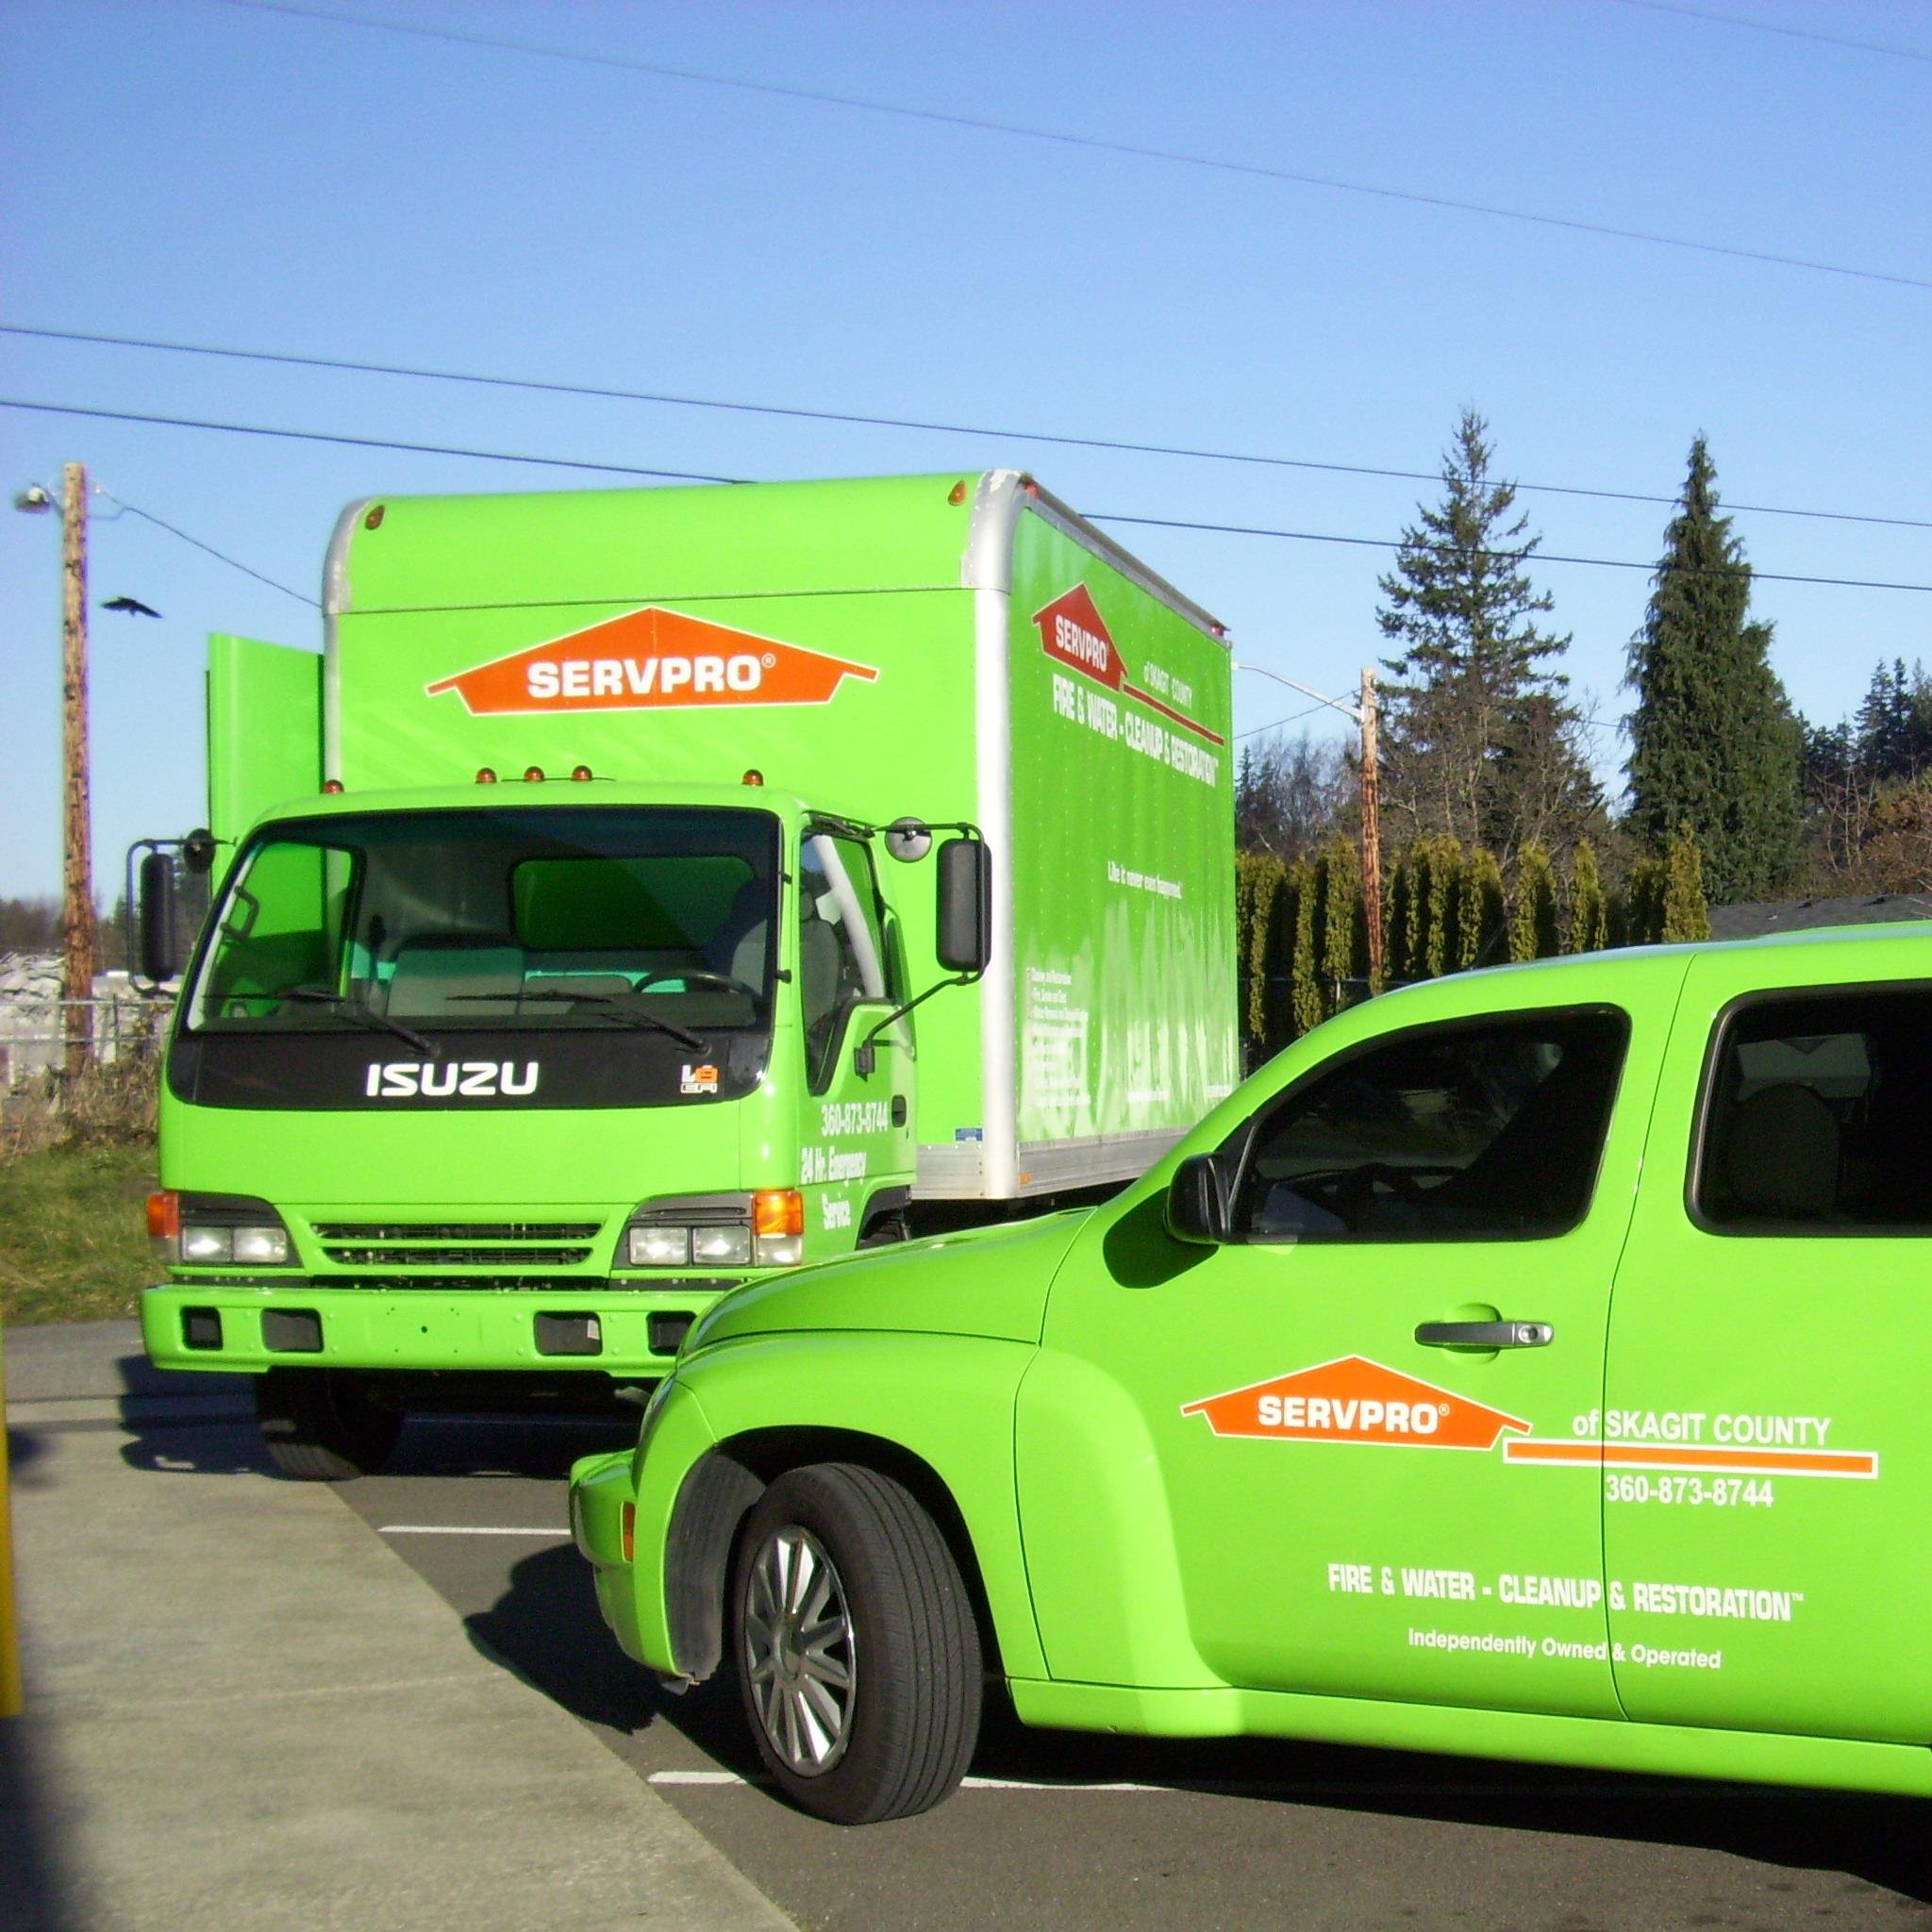 SERVPRO of Skagit County Professionals provide fire and water damage restoration services. 24/7 Emergency Service!